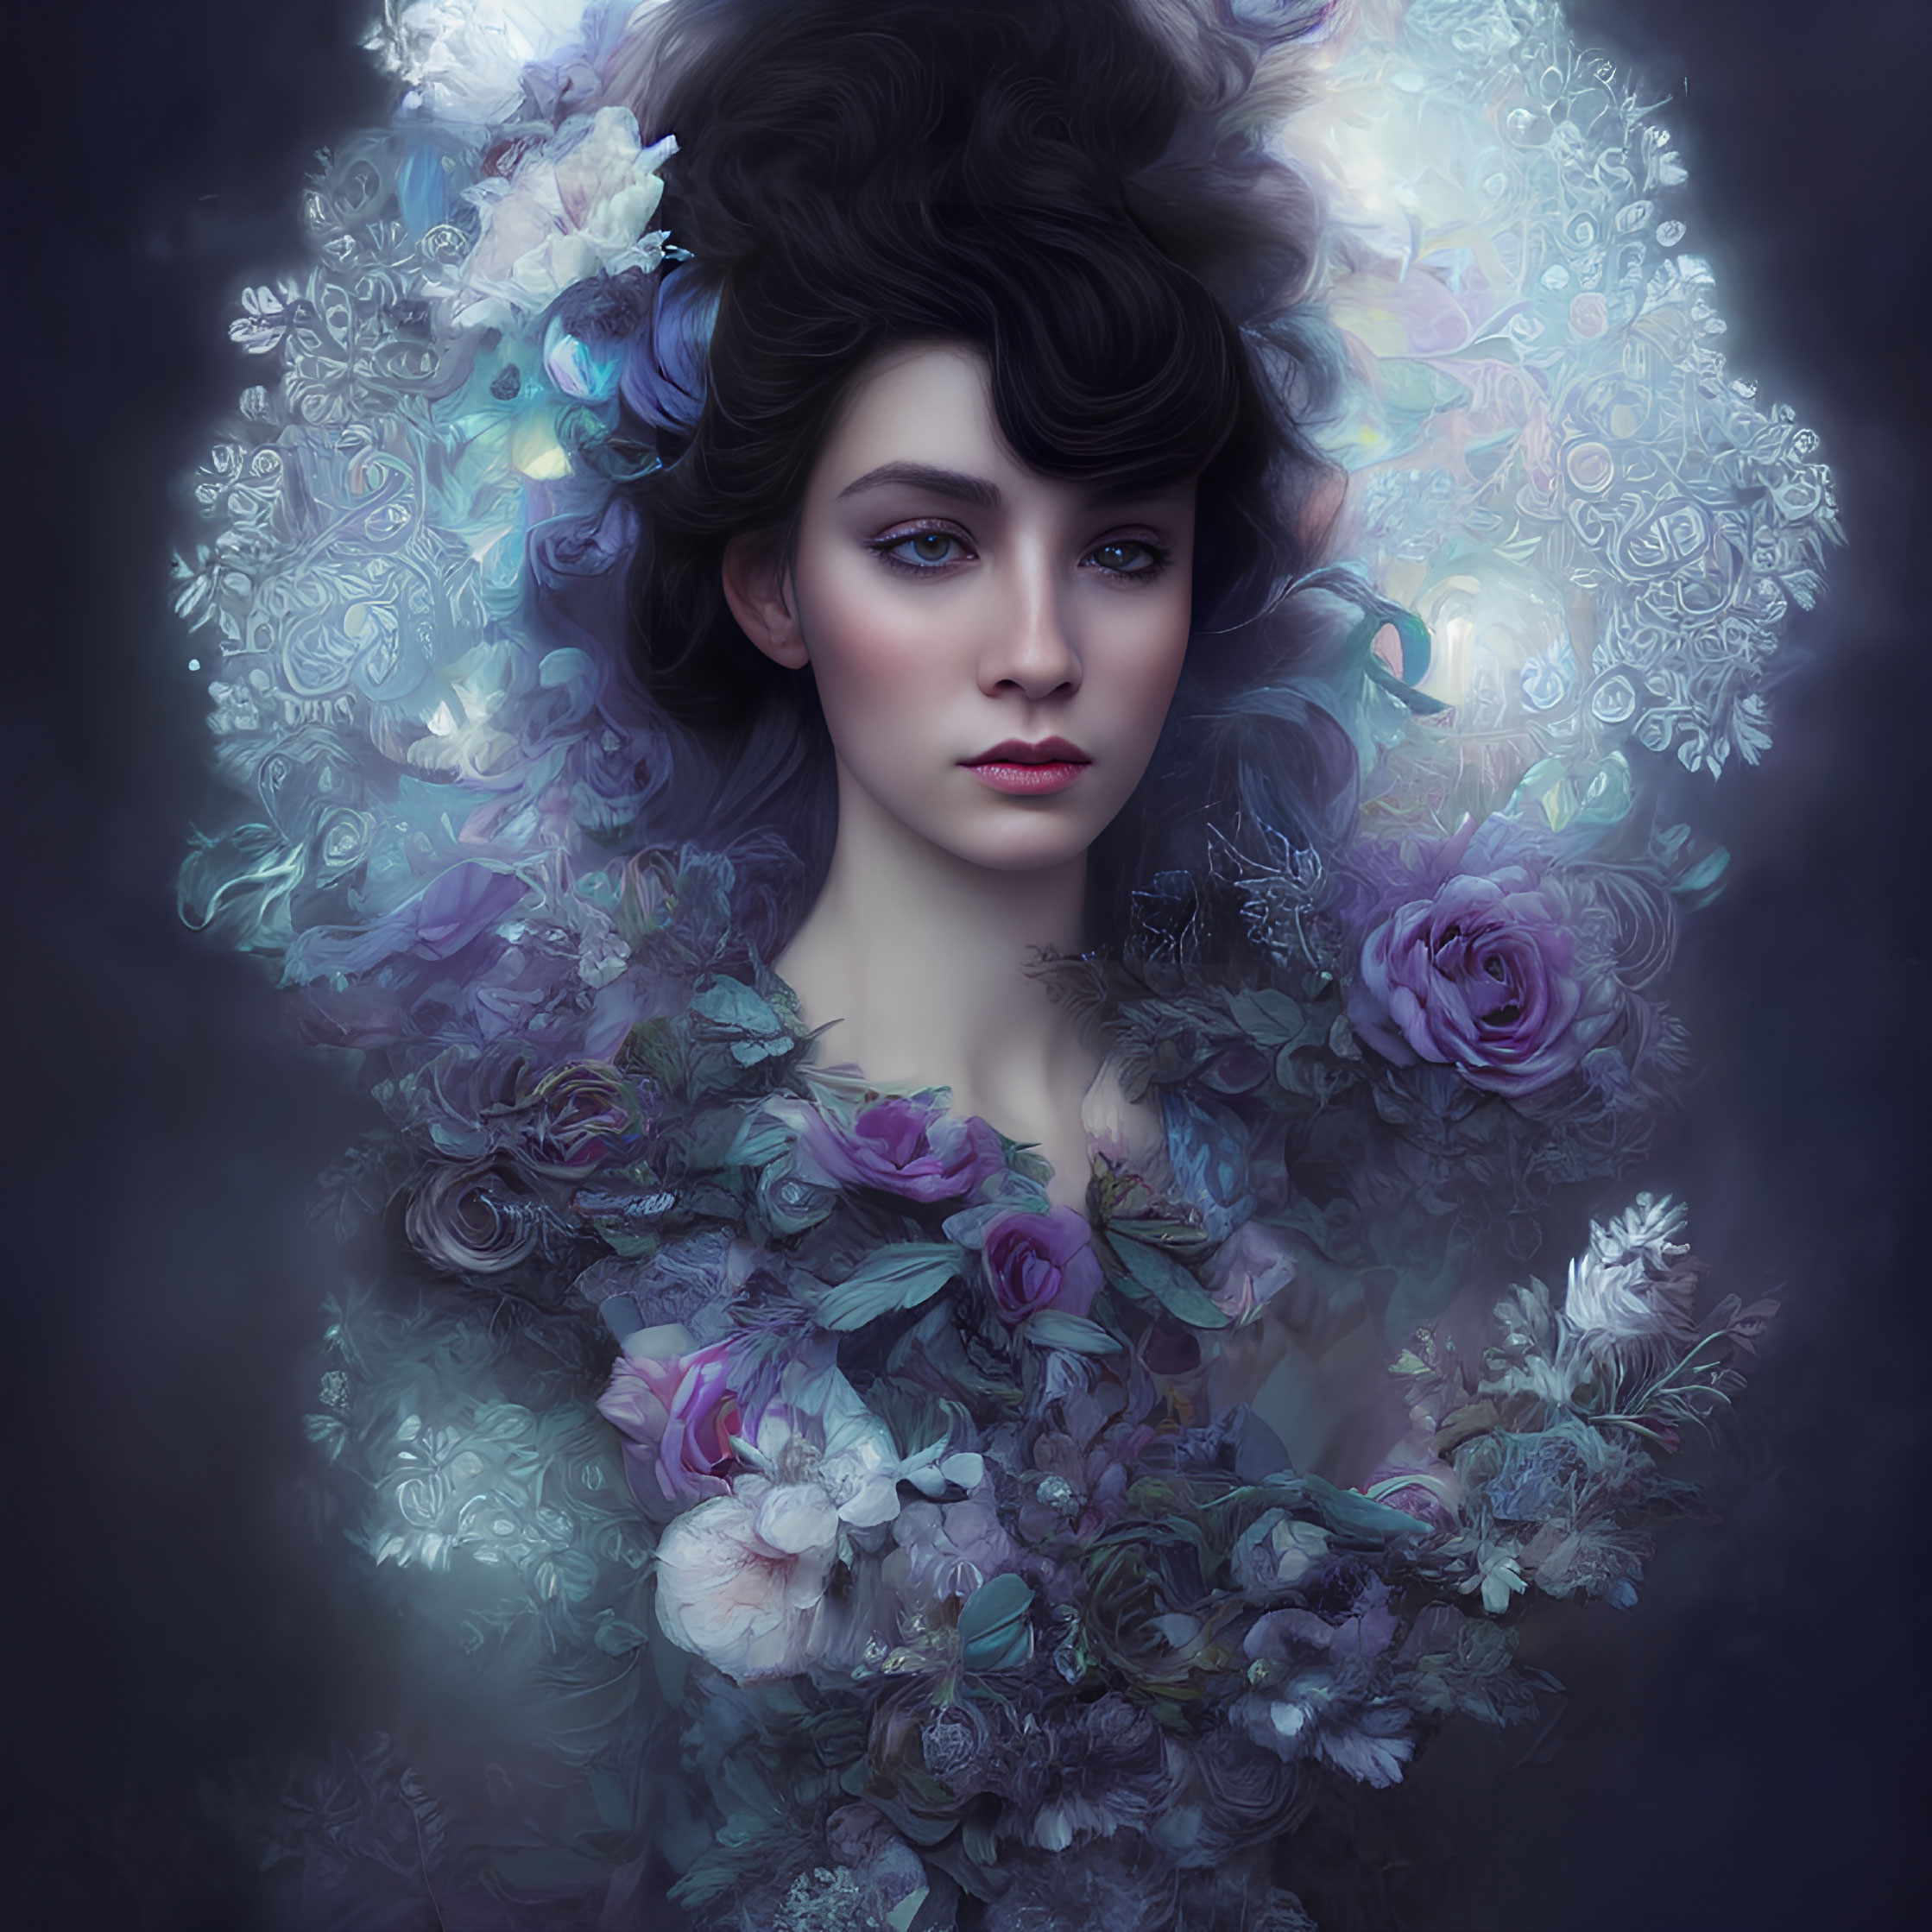 Portrait of woman with dark hair and fair skin among mystical blue and purple flowers